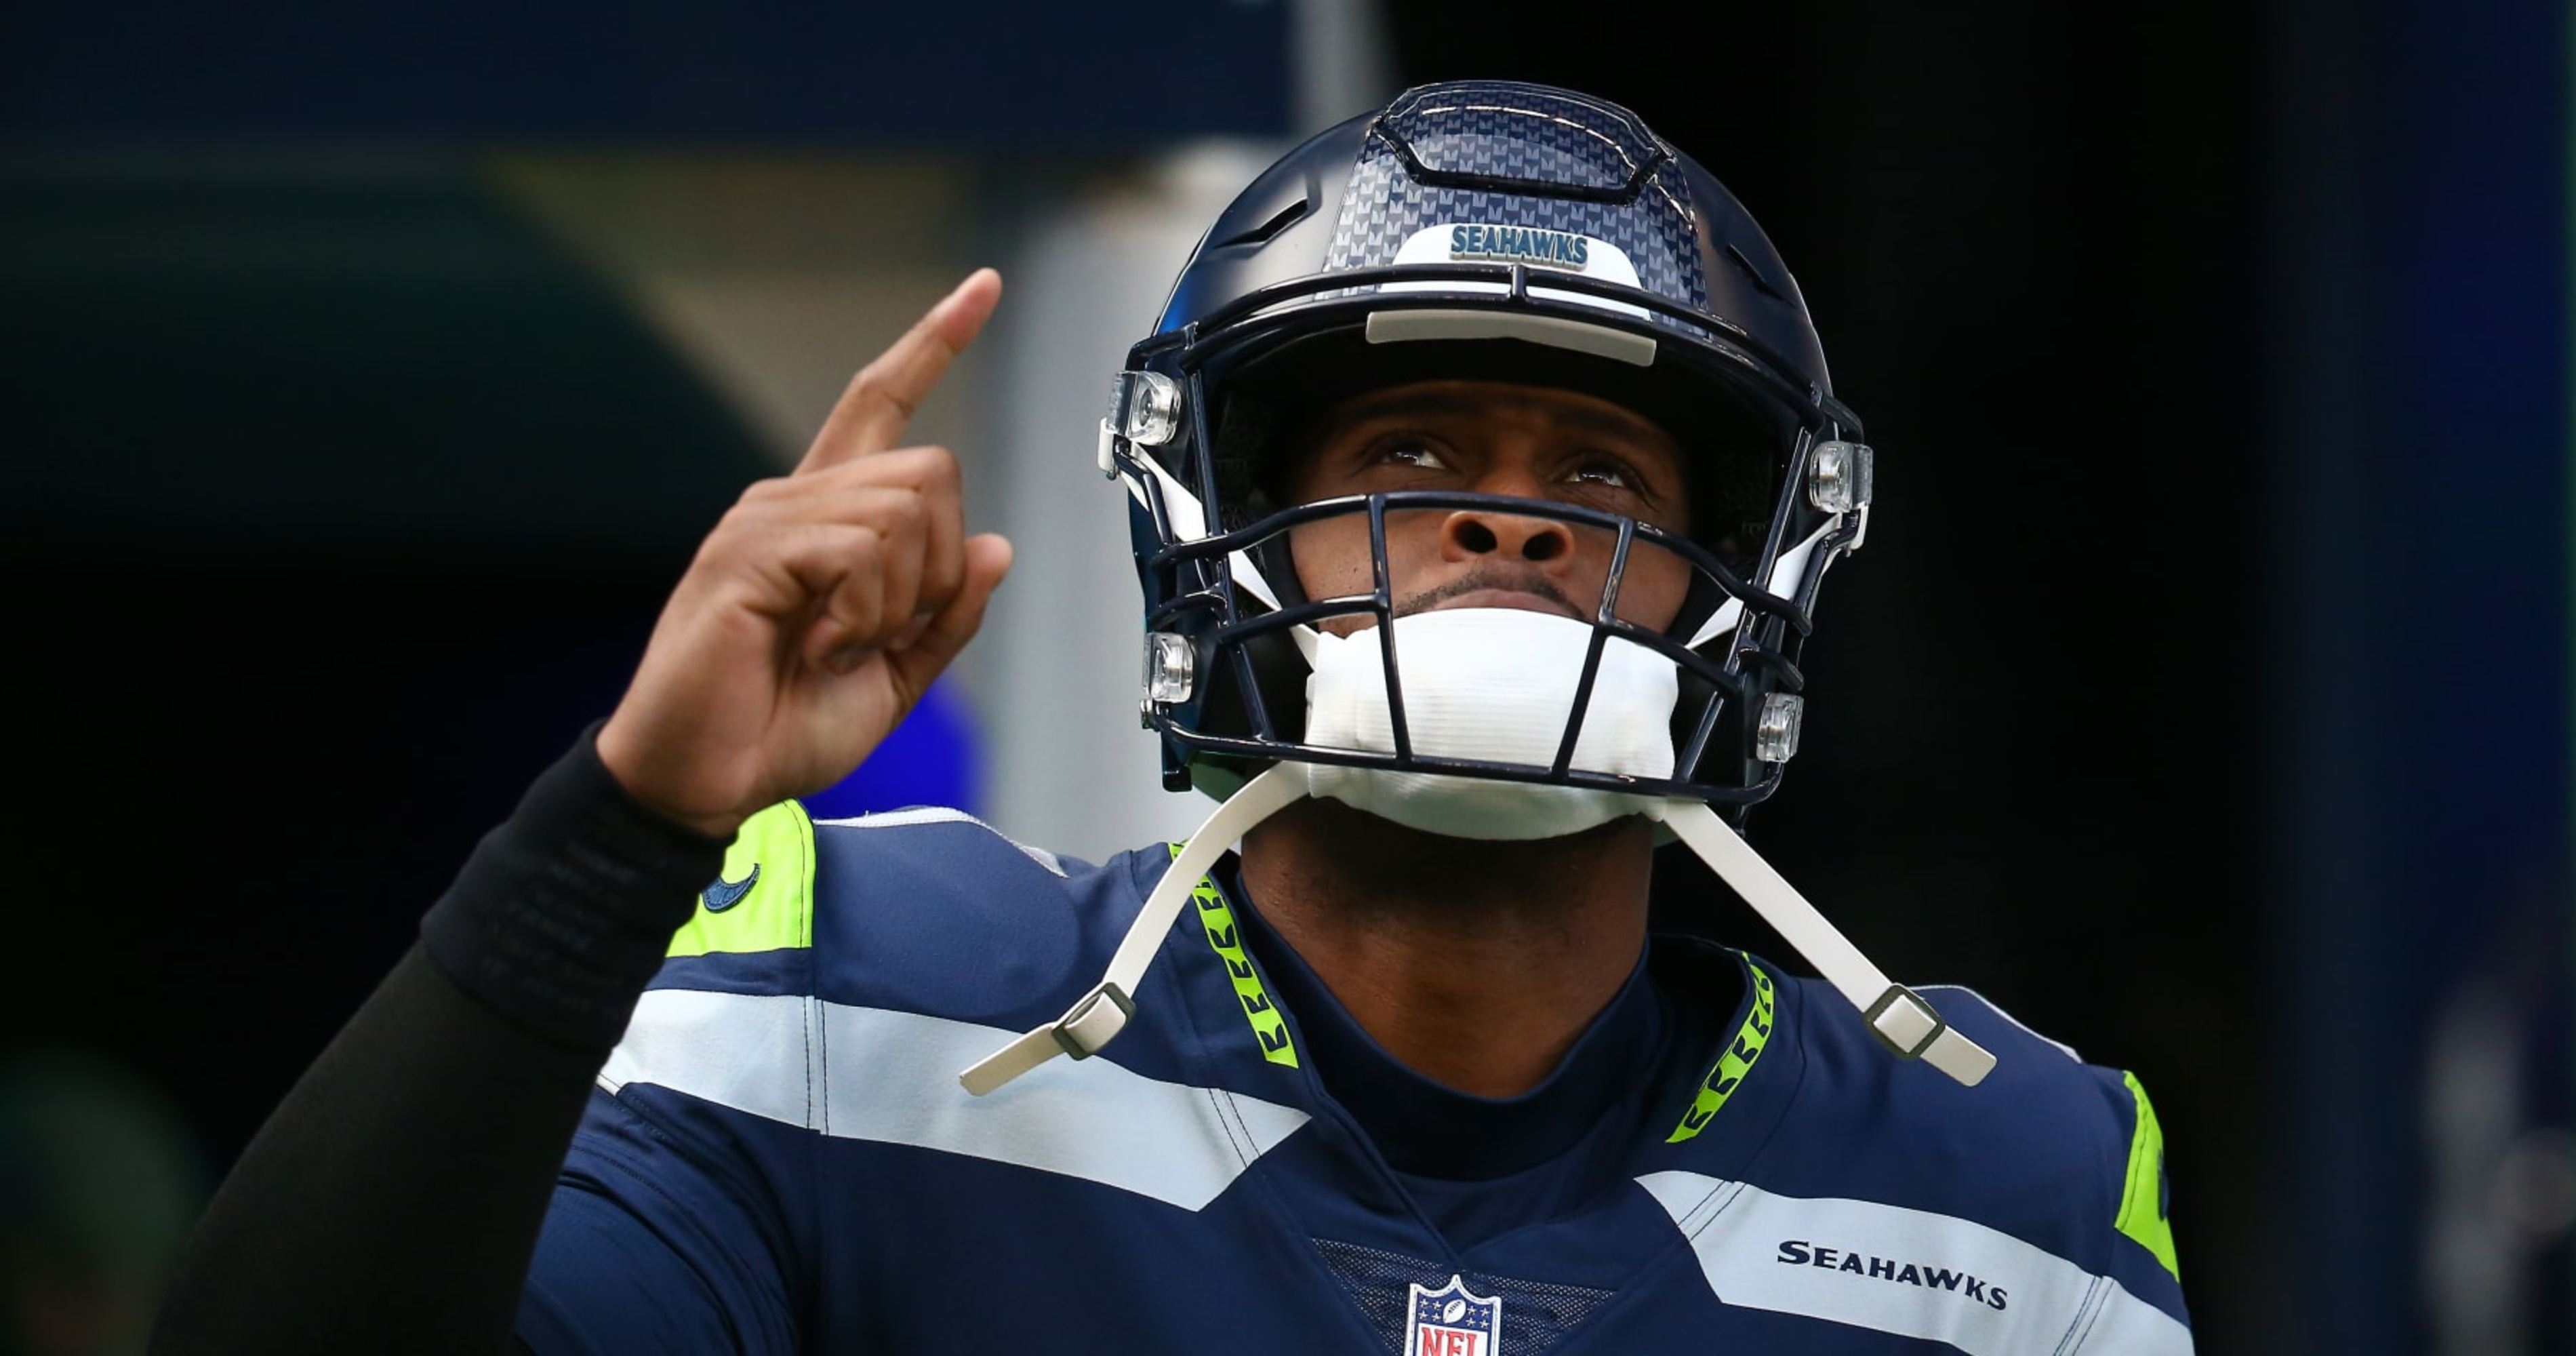 Seahawks' Geno Smith Earns 1M Contract Bonus After Eclipsing 4K